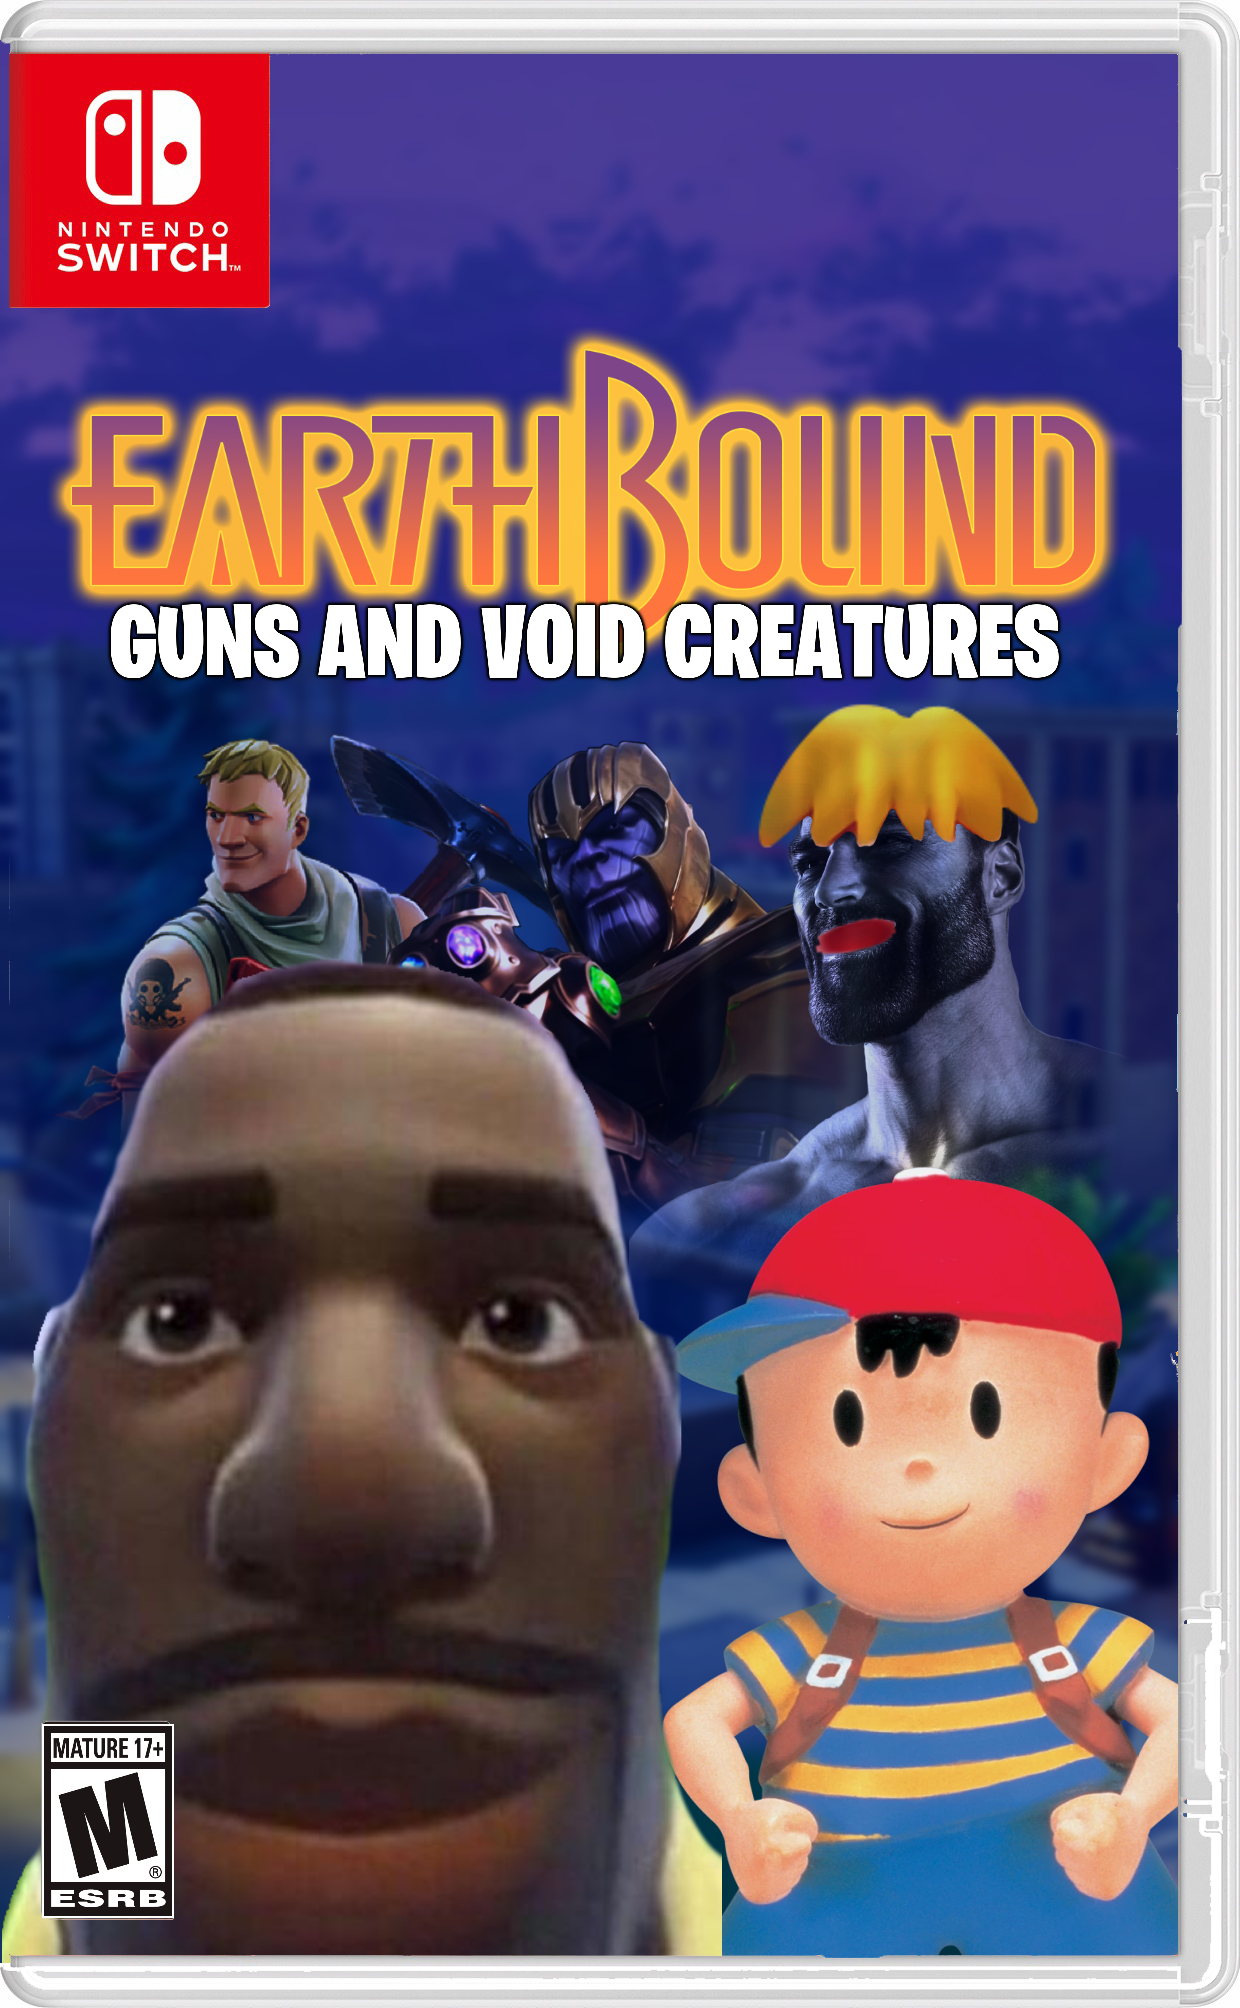 is earthbound coming to switch